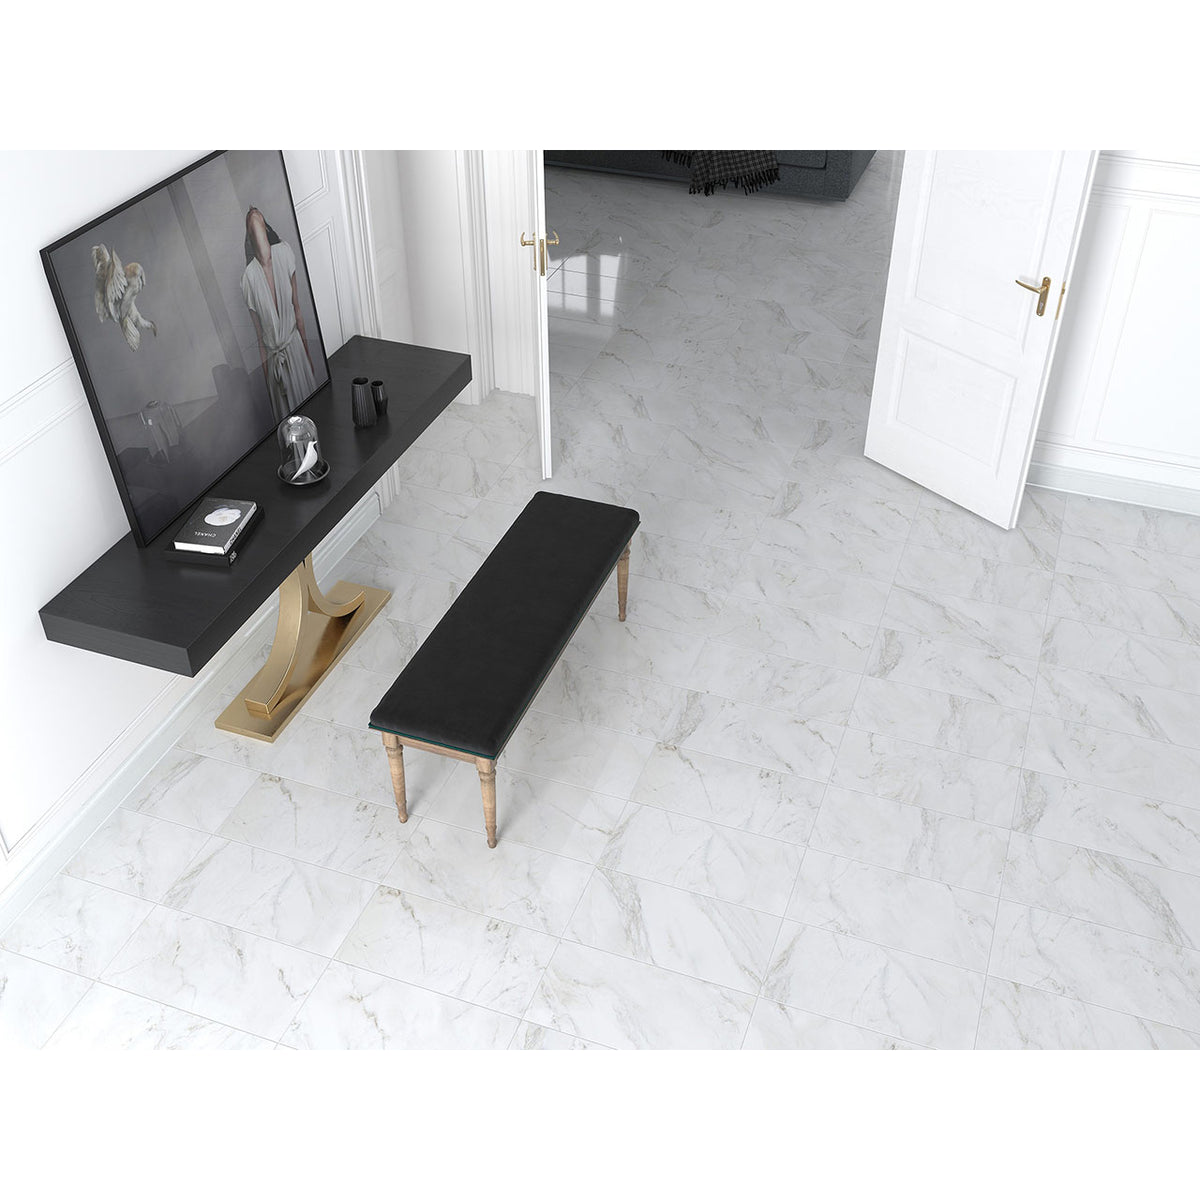 Floors 2000 - Anderson 24 in. x 24 in. Porcelain Tile - White Polished Room